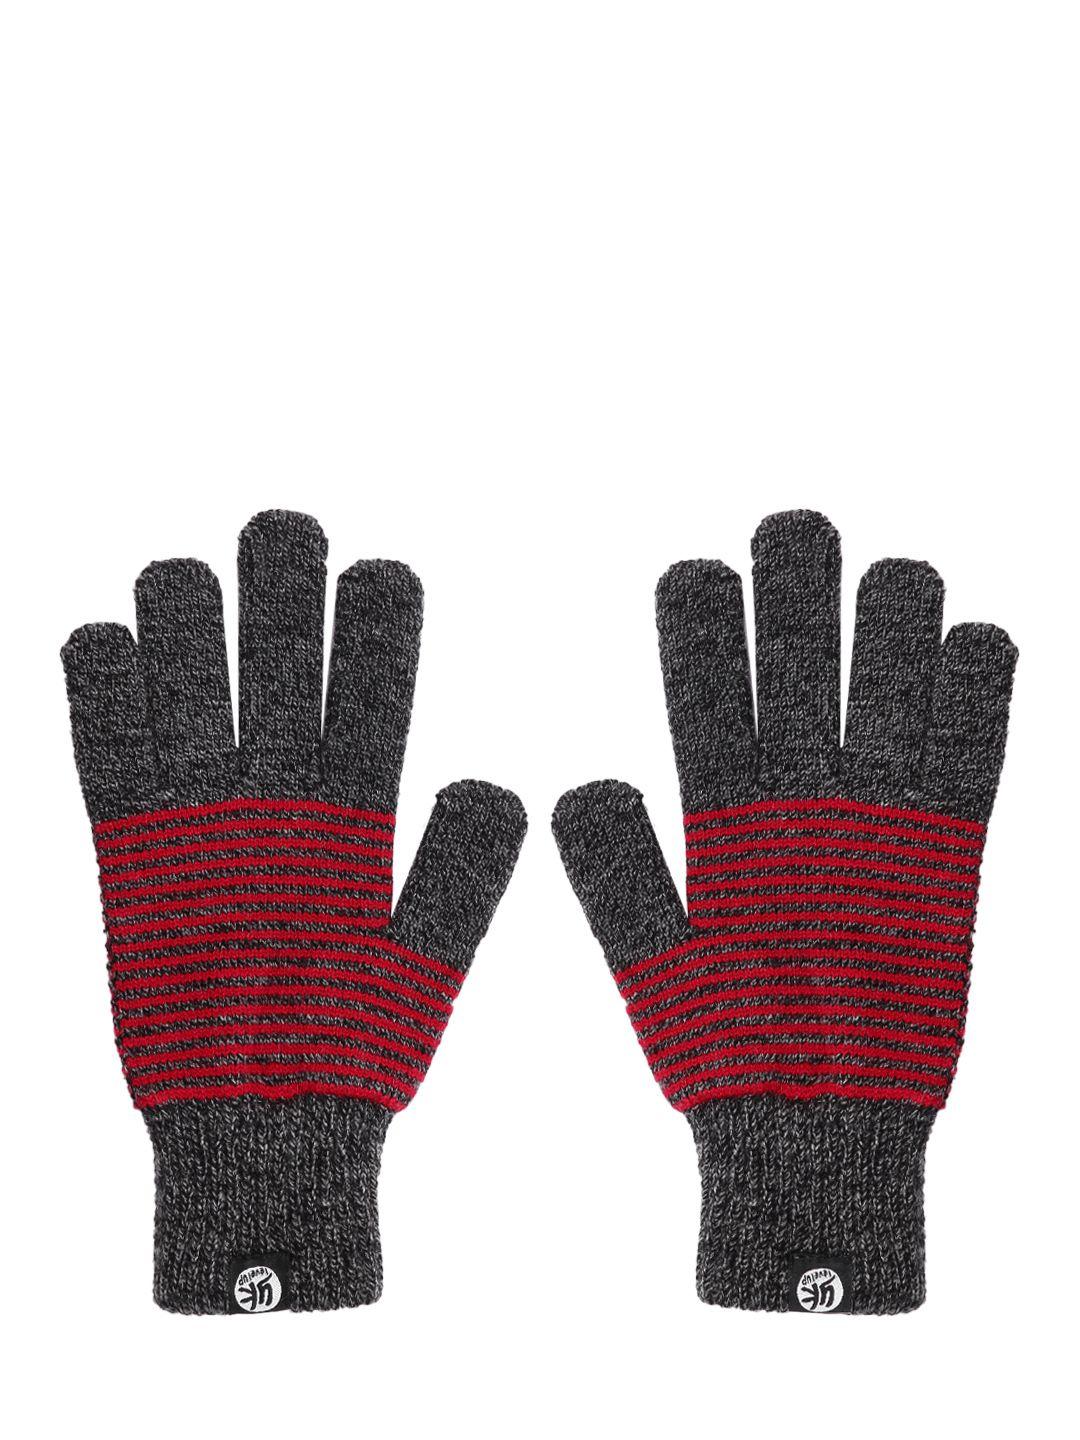 yk kids charcoal grey & red striped hand gloves